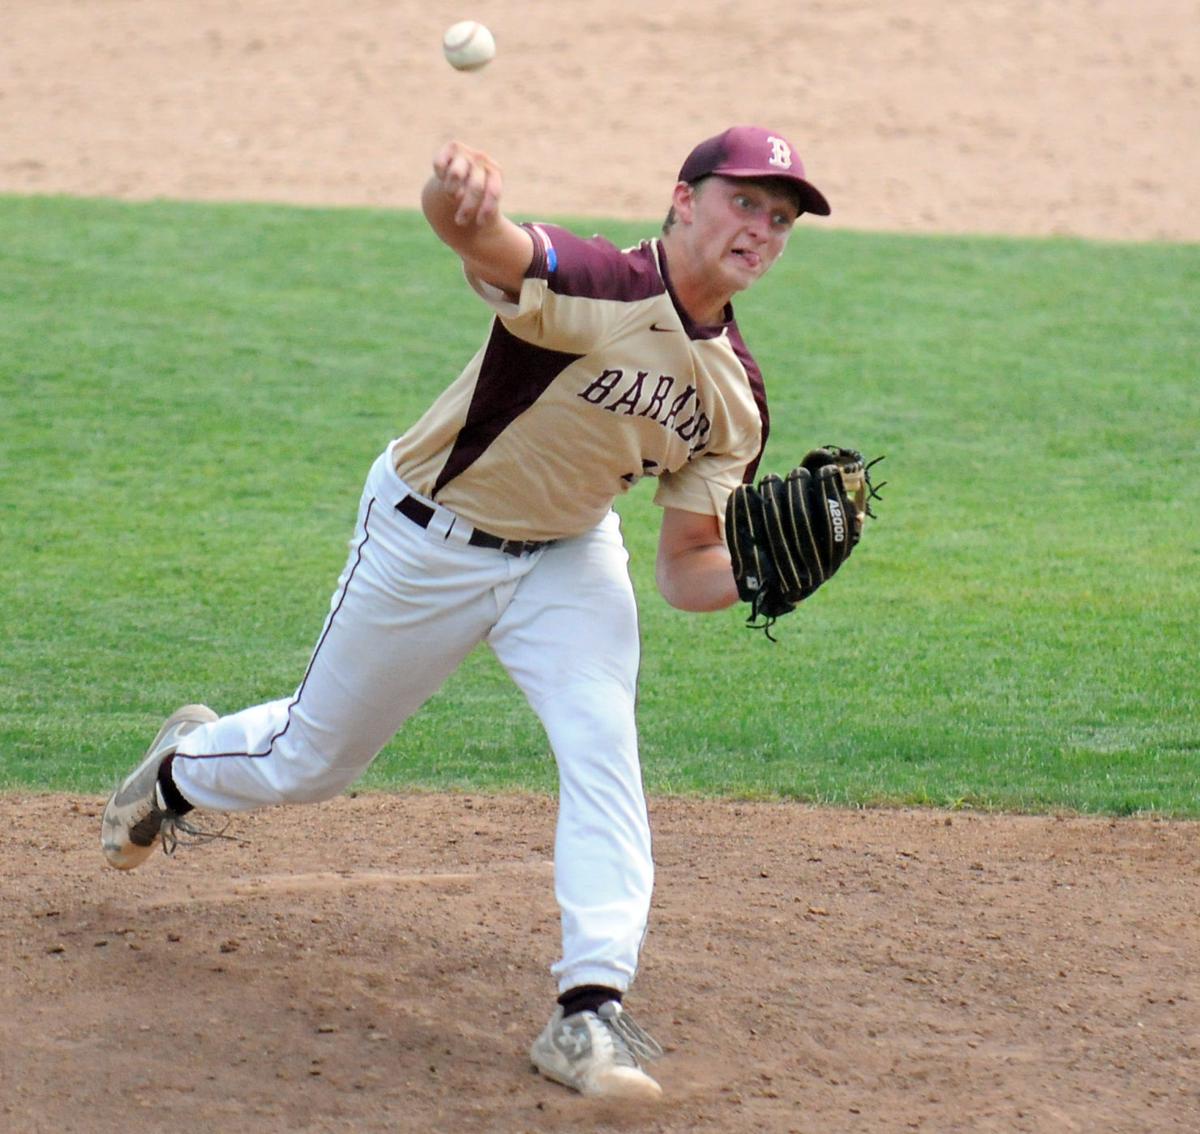 LEGION BASEBALL: Ginther goes lights out, lifts Baraboo past Tomah